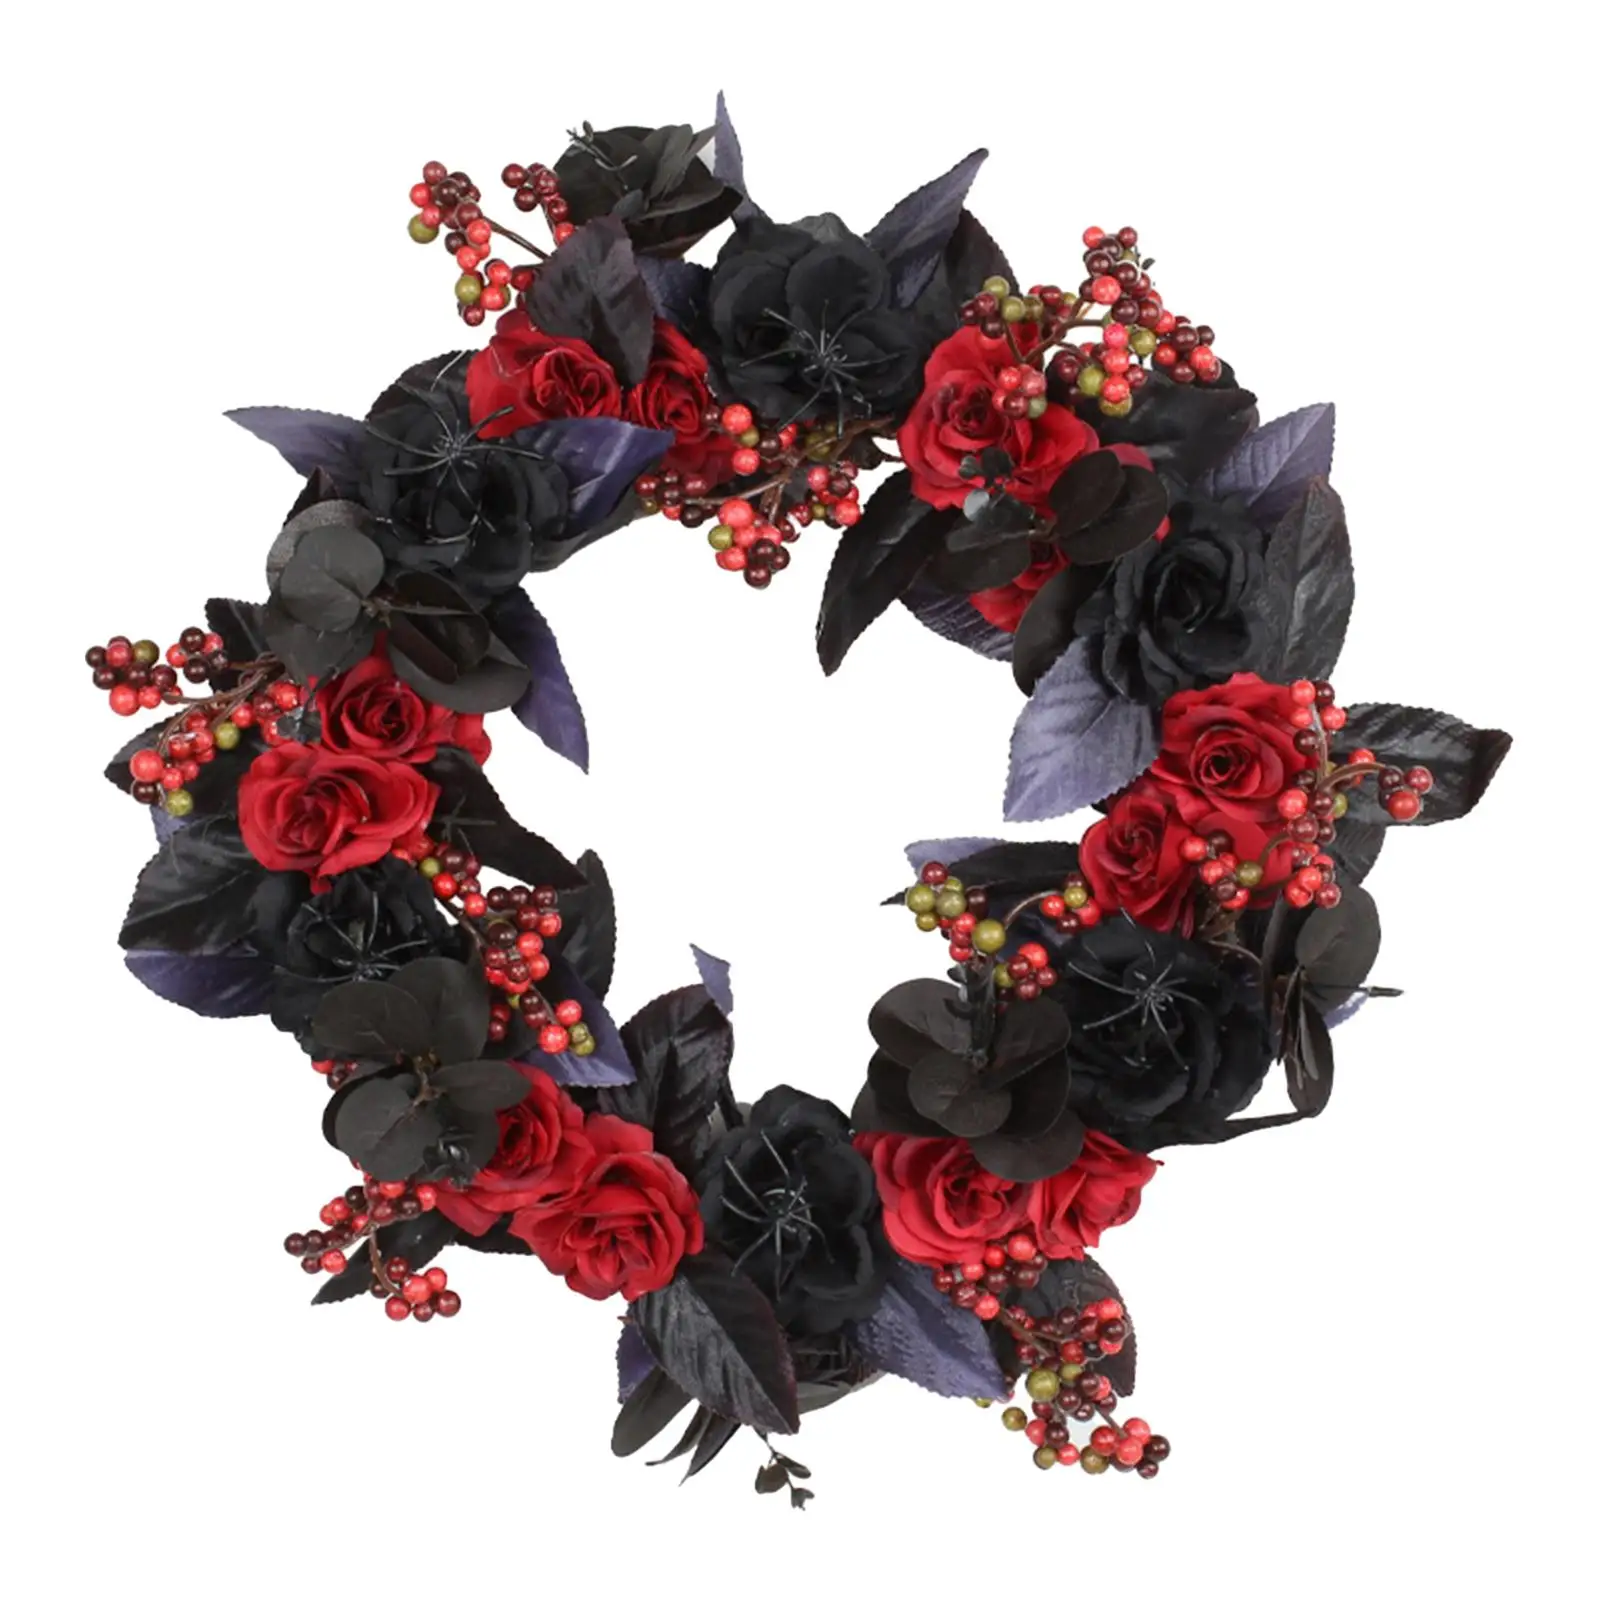 Artificial Flower Wreath Decorative Door Hanging Decor Black and Red Rose Wreath for Garden Farmhouse Office Indoor Festival